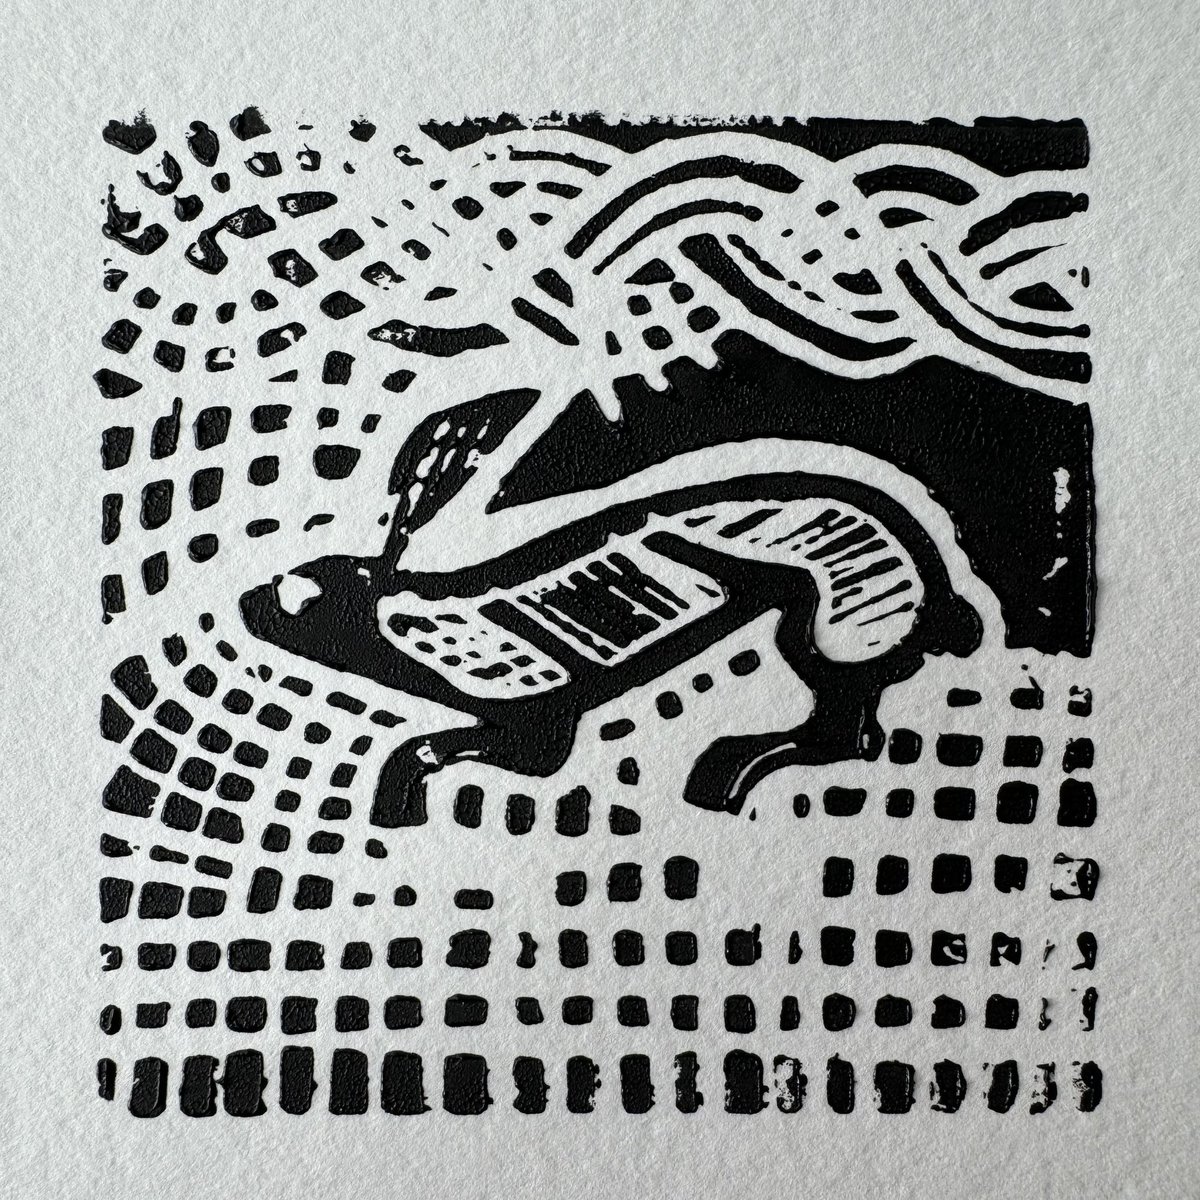 Roman rabbit lino print - inspired by @CotswoldArch’s beautiful find!